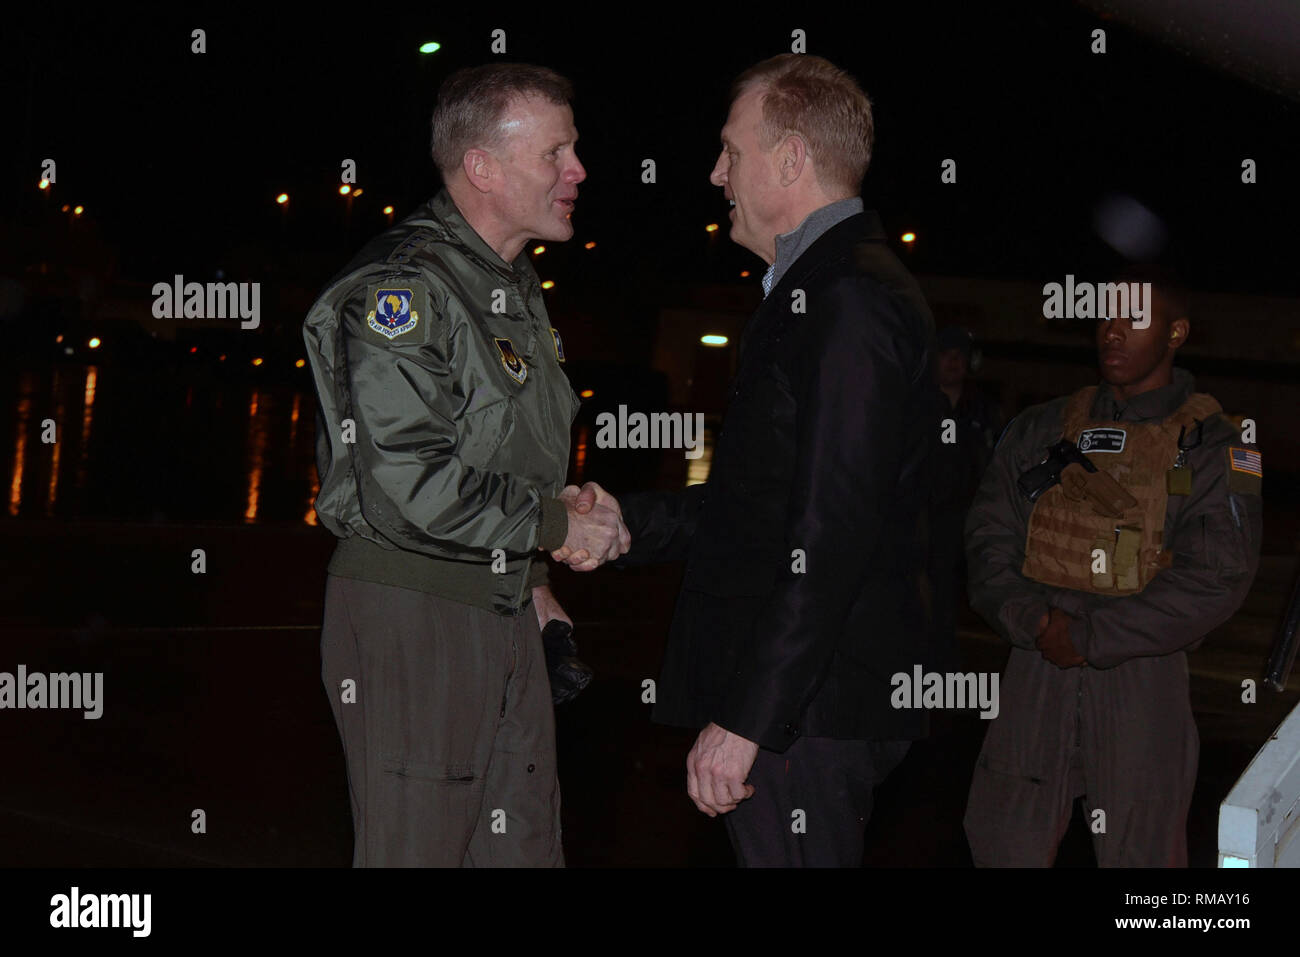 U.S. Acting Defense Secretary Patrick M. Shanahan arrives at Ramstein Air Base, Germany, en route to Afghanistan, Feb. 10, 2019. Shanahan greeted Air Force Gen. Tod D. Wolters, the commander of U.S. Air Forces in Europe; commander, U.S. Air Forces Africa; and commander, Allied Air Command, upon arrival. (DoD photo by Lisa Ferdinando) Stock Photo